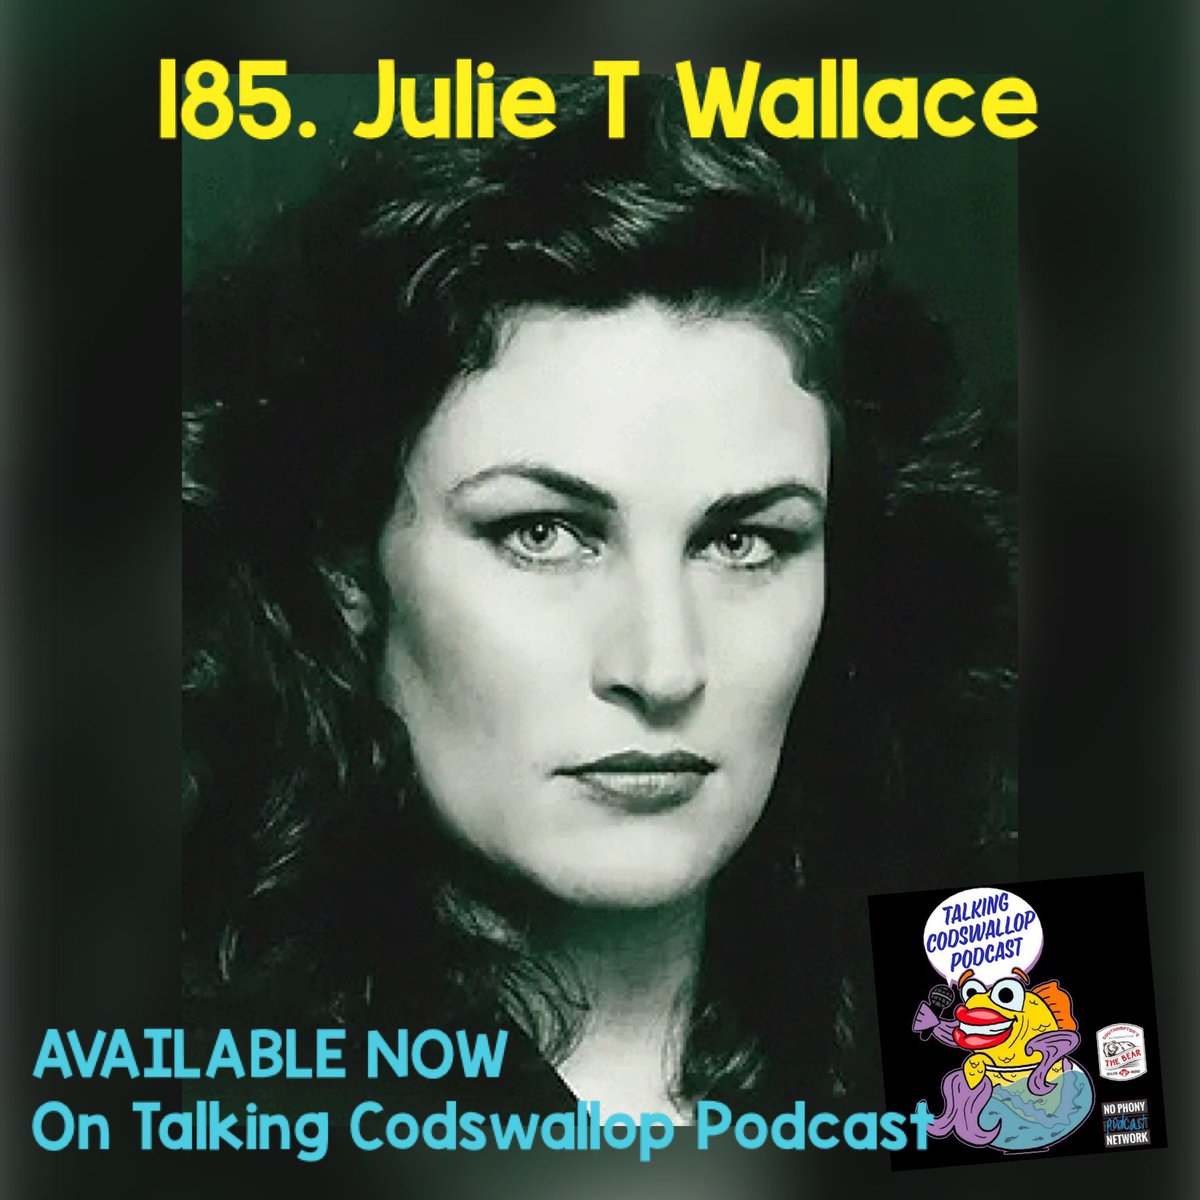 185. Julie T. Wallace @JSTheVoice1 managed to sit down & talk with the one & only #SheDevil & #BondGirl @julieTwallace. This interview was beyond brilliant! Enlightening, entertaining & amusing! #NoPhony #WLIPodPeeps #BondJamesBond #BondIsBack #Podcast #Comedy